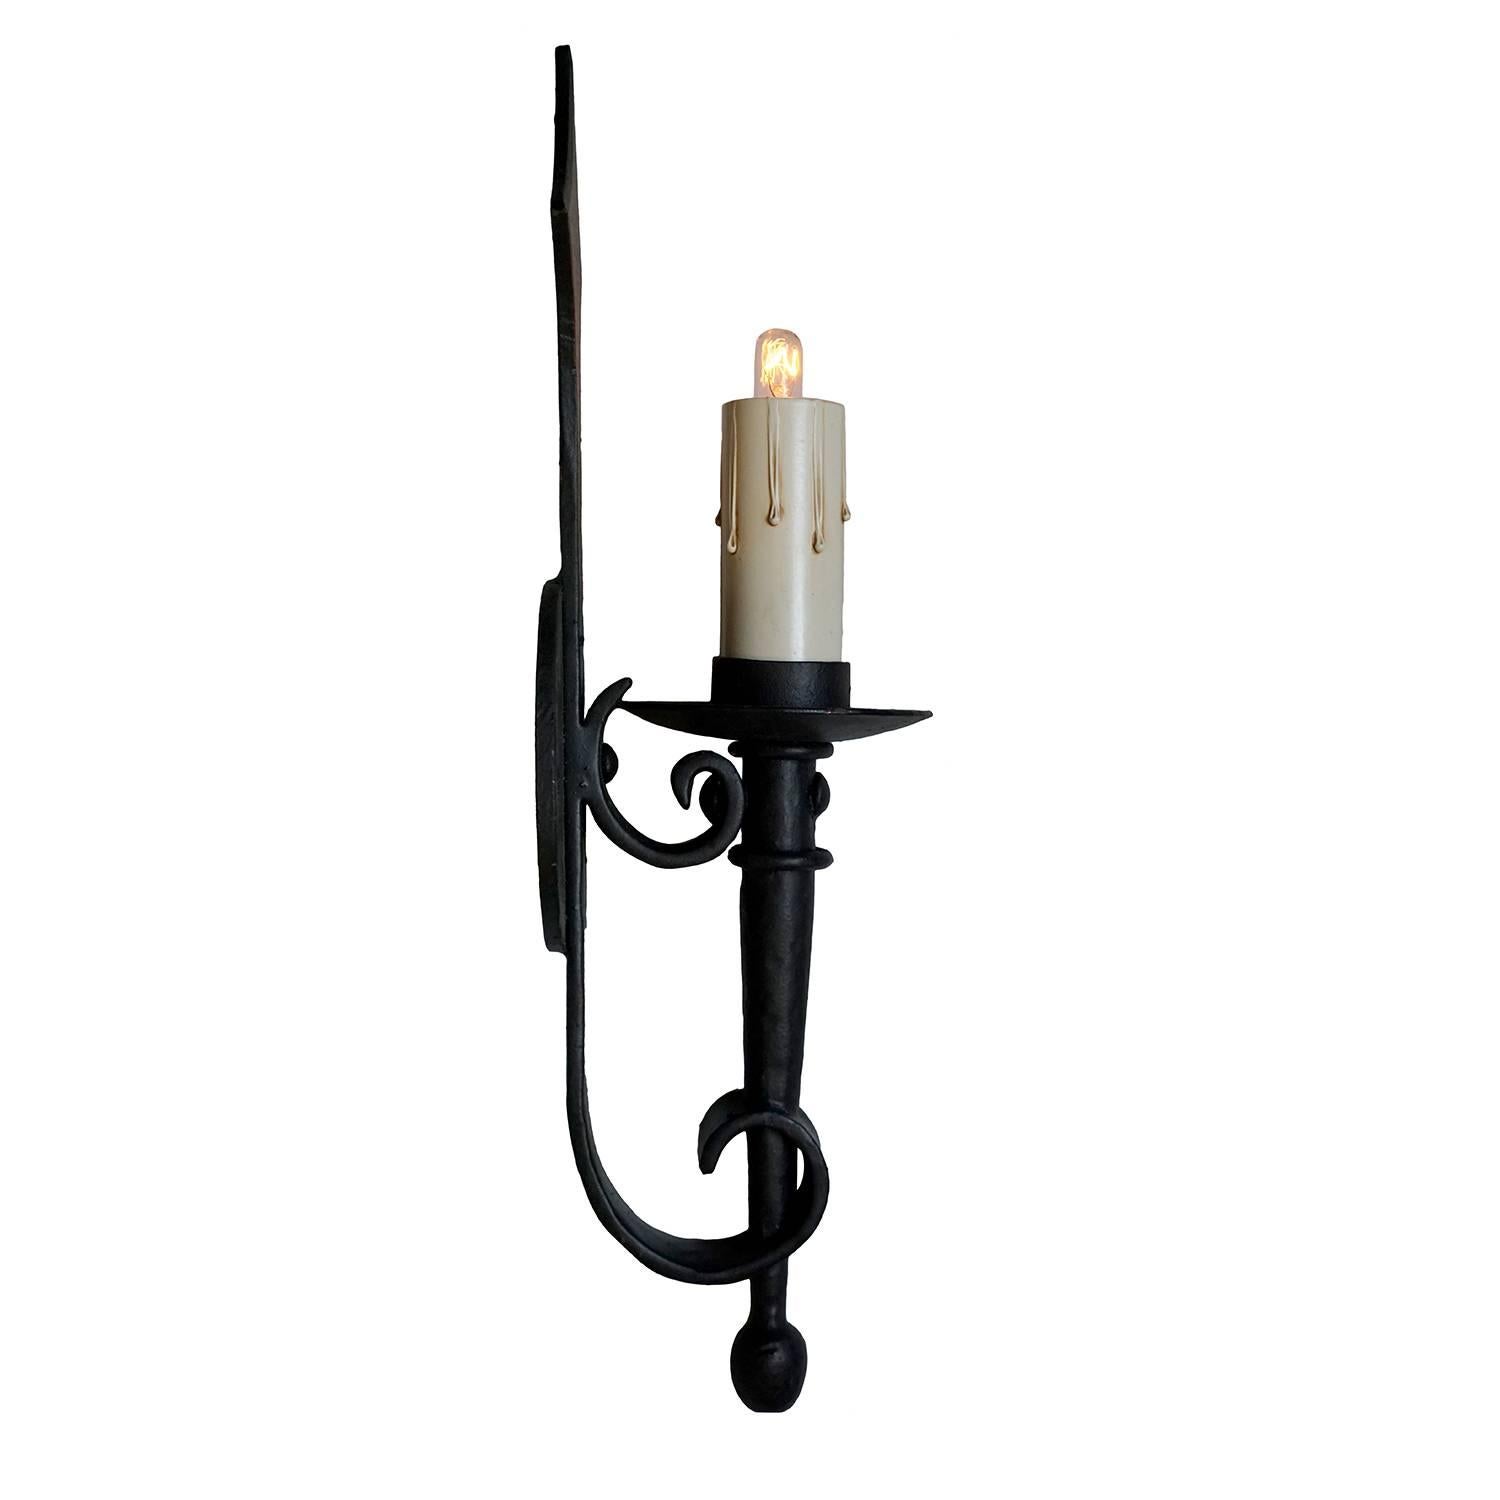 This wrought iron arm mount fixture has a classic French influence, with simple scrolls and a diamond motif on the backplate.  A perfect sconce for many architectural styles, including Spanish Hacienda, Mediterranean Villa and French Colonial. 